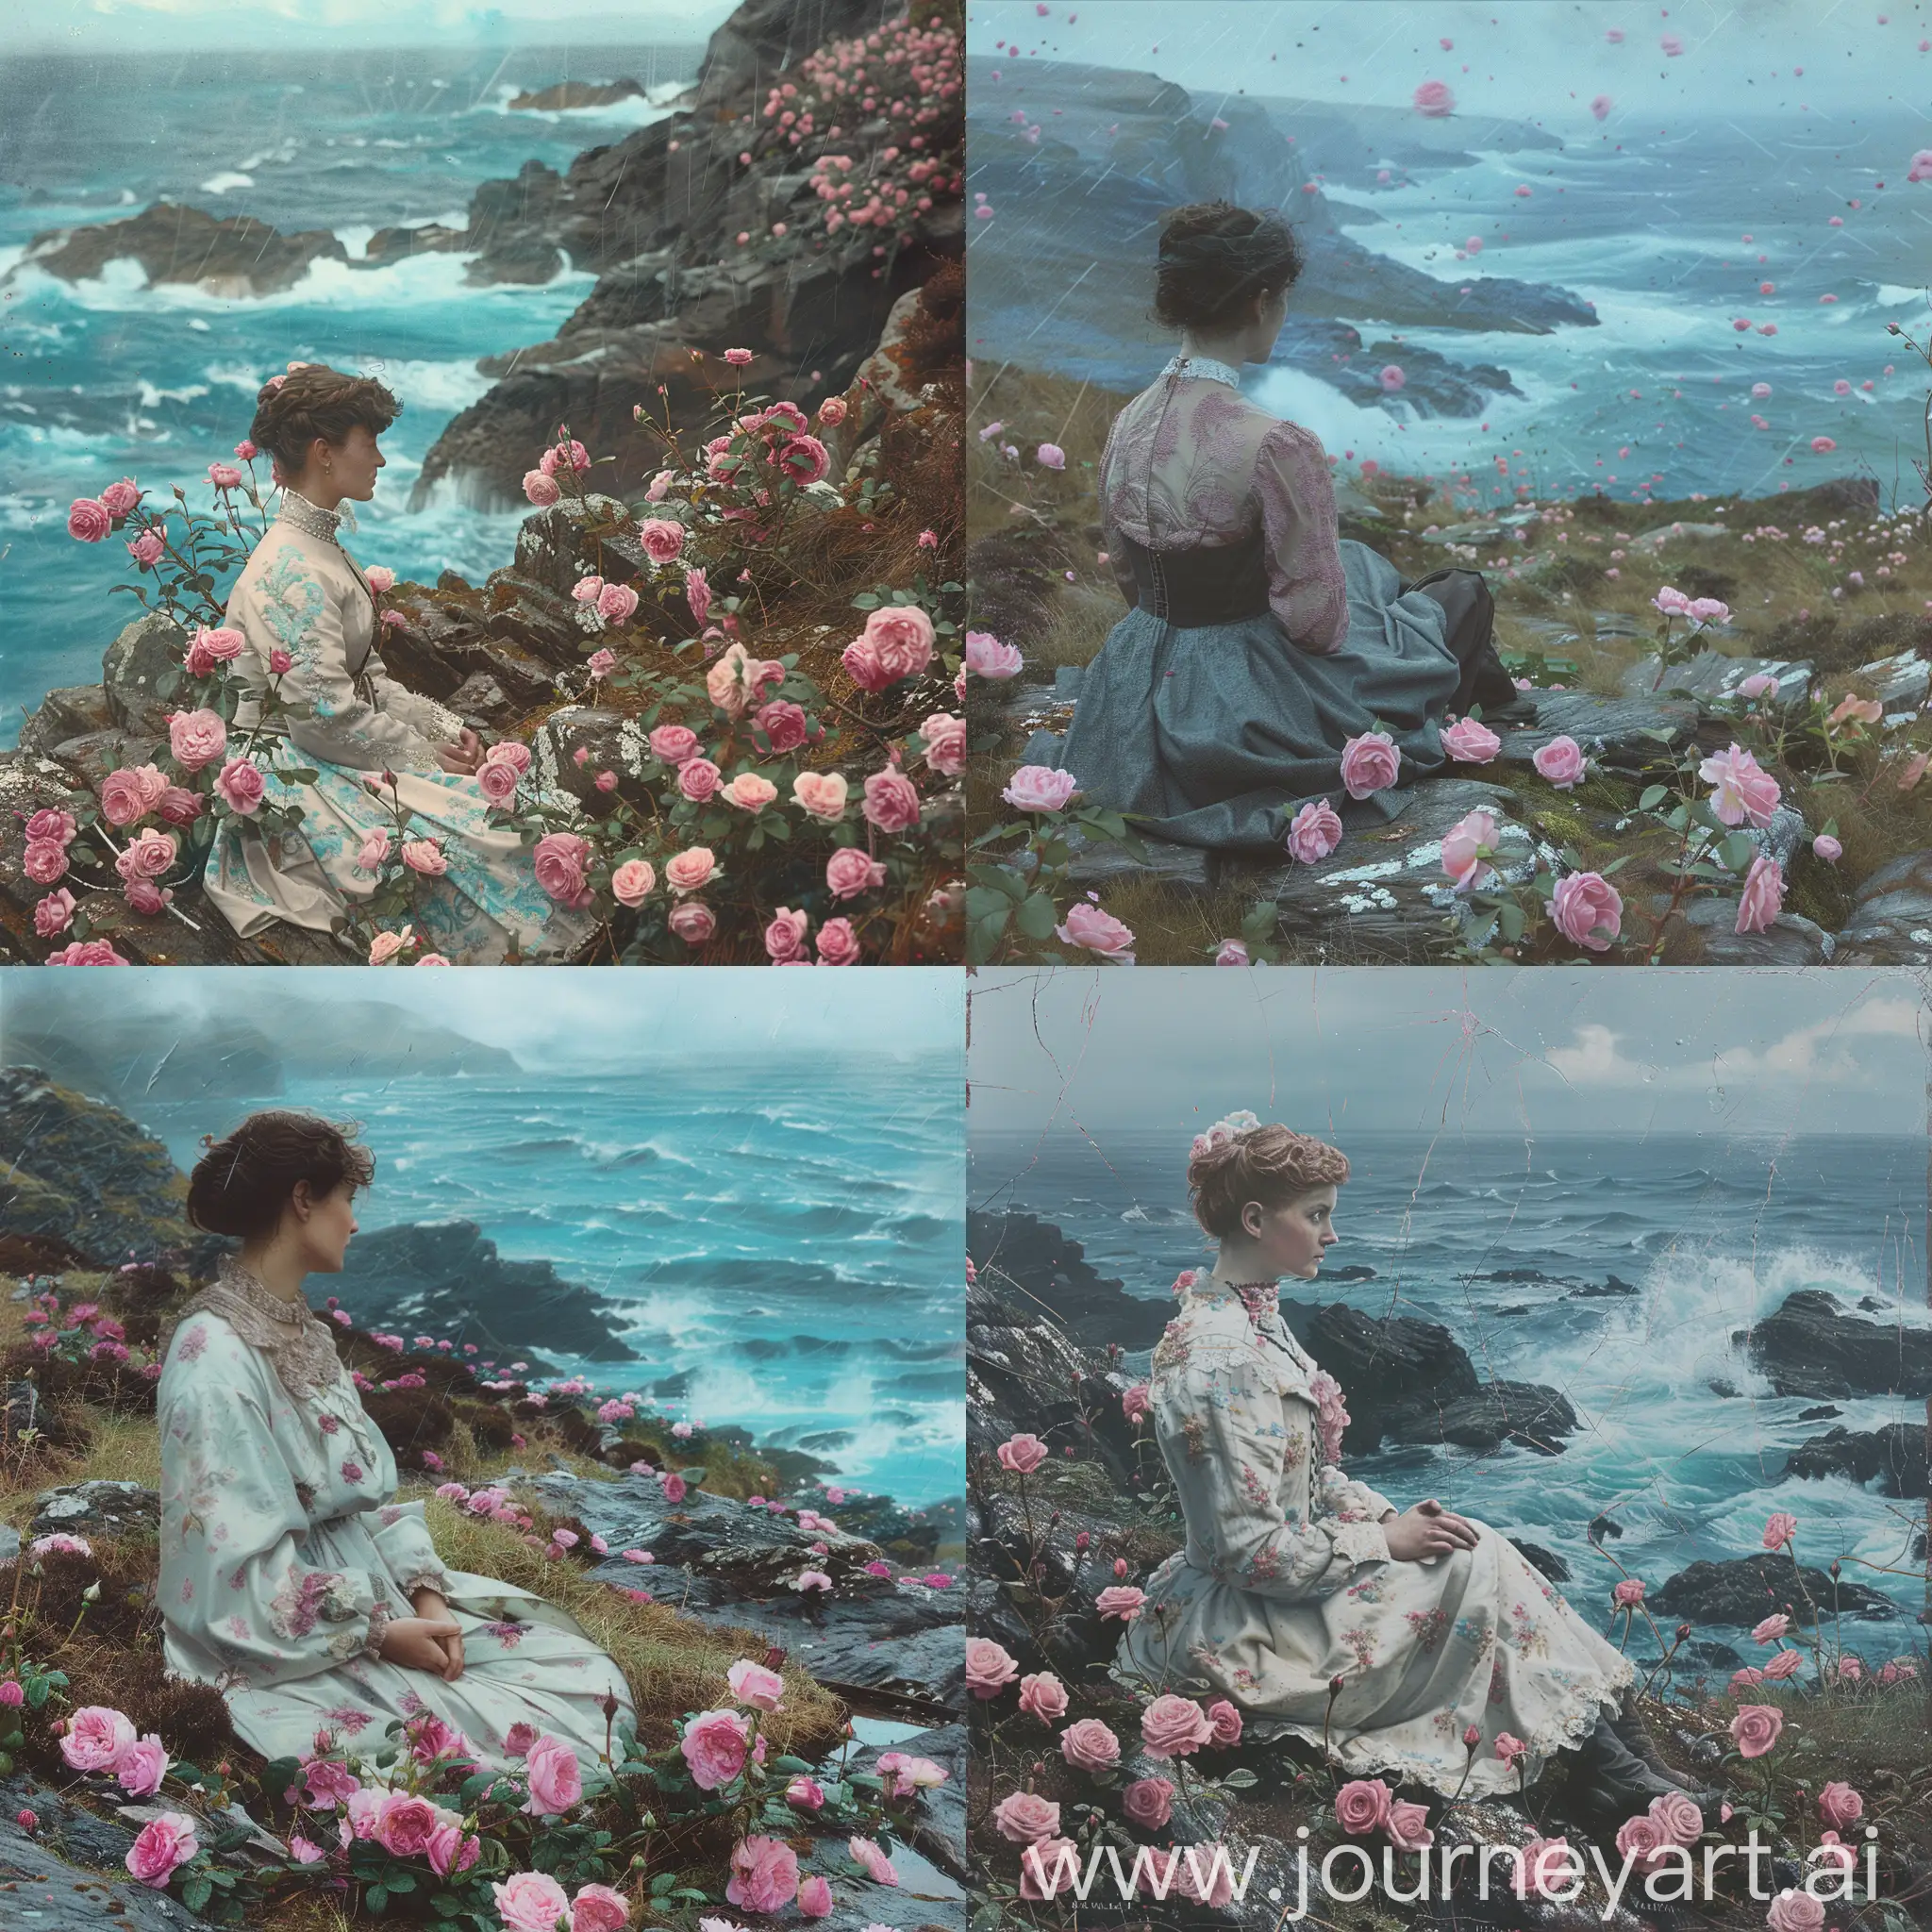 It's a rainy day in Scotland but the sun is shining, an edwardian woman is sitting on a rocky hill looking out to sea, the sea is blue but choppy, foamy waves are crashing on the rocks, the woman is pensive, sad and lonely but she has a proud and accepting expression. pink roses are everywhere around her